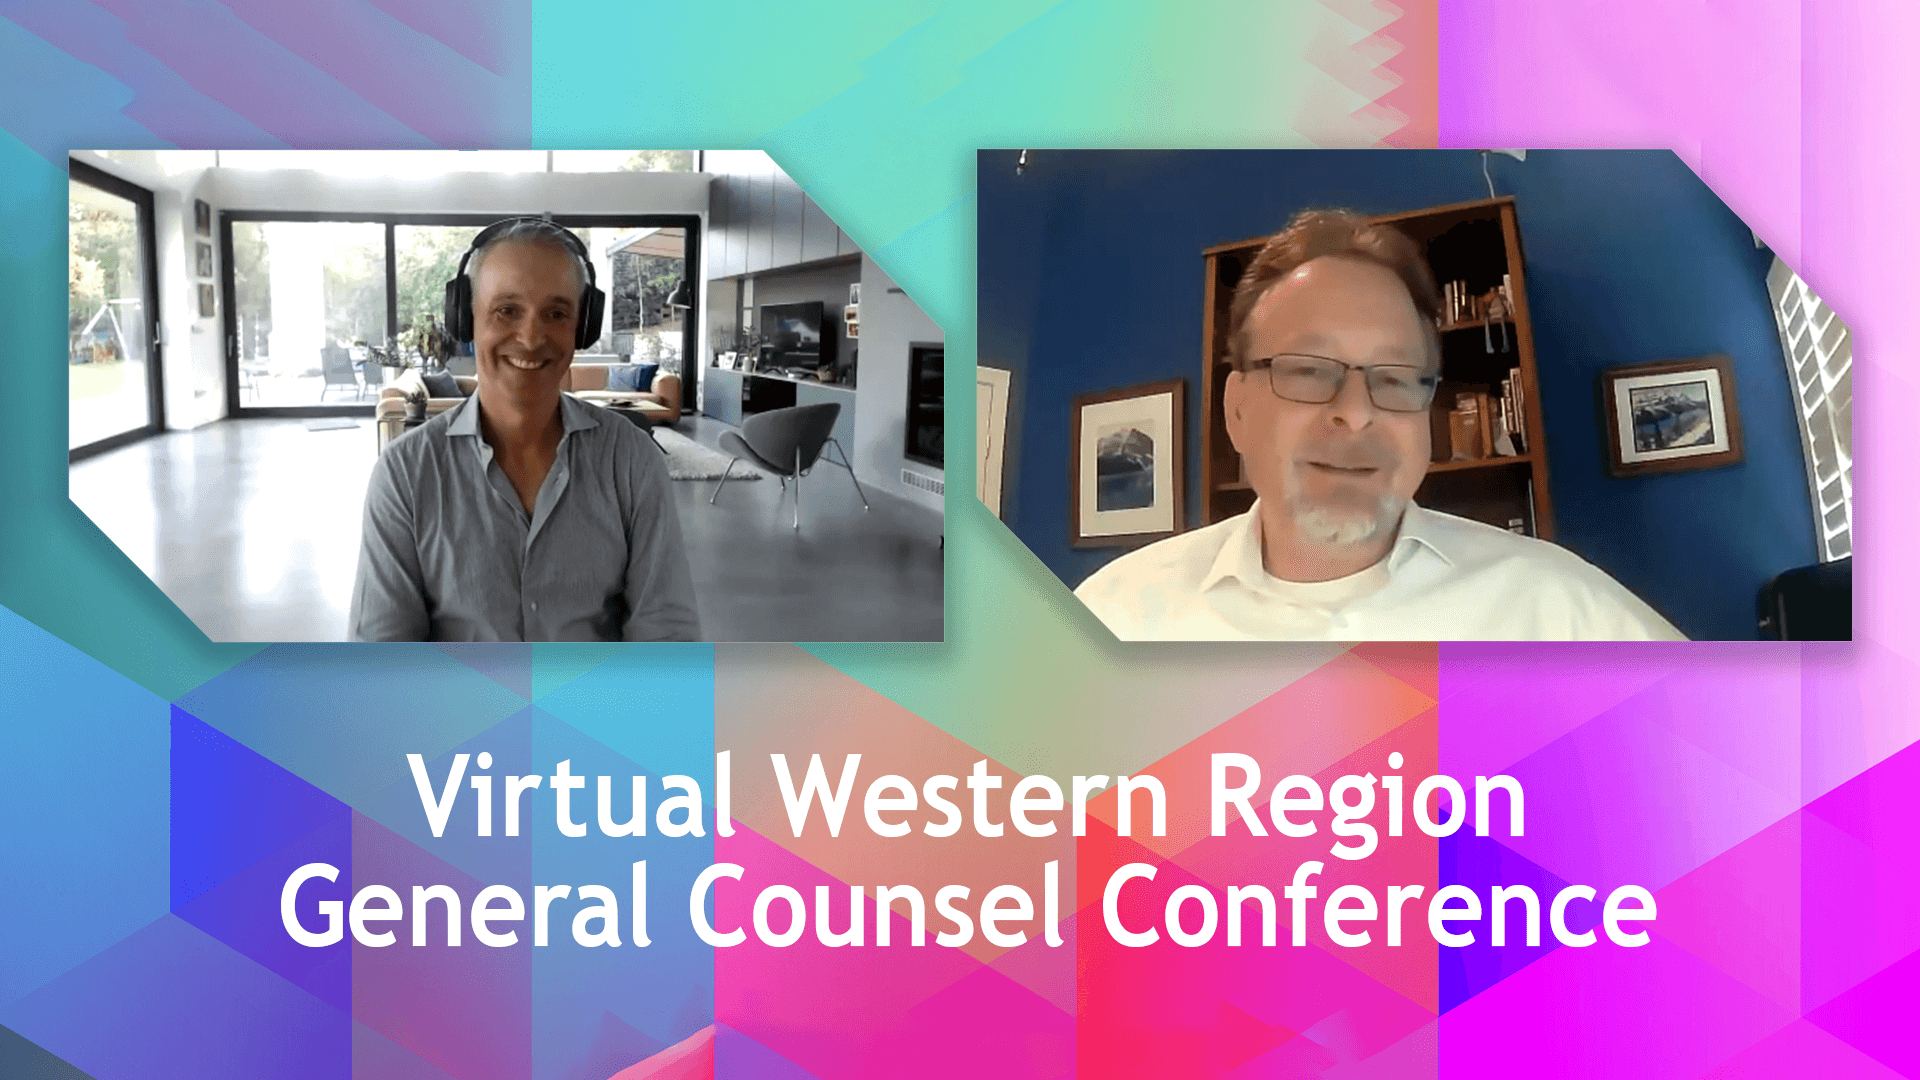 Zesty<sup>AI</sup> and California Department of Insurance Speak at APCIA's 2021 Virtual Western Region General Counsel Conference